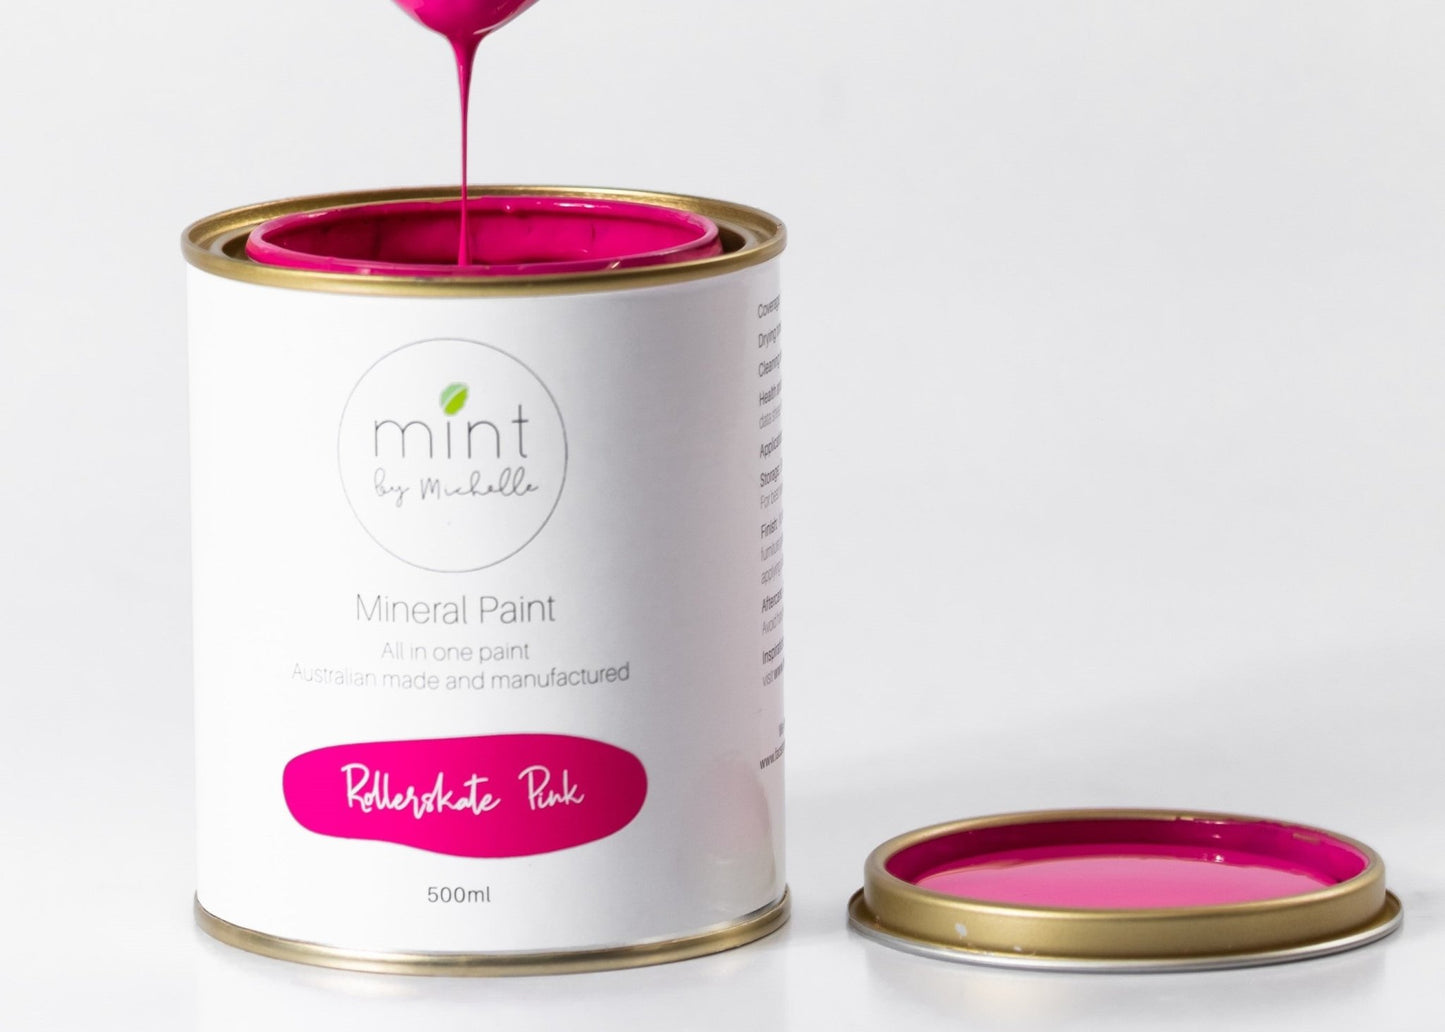 Mint Mineral Paint - Rollerskate Pink - 500ml - Rustic River Home